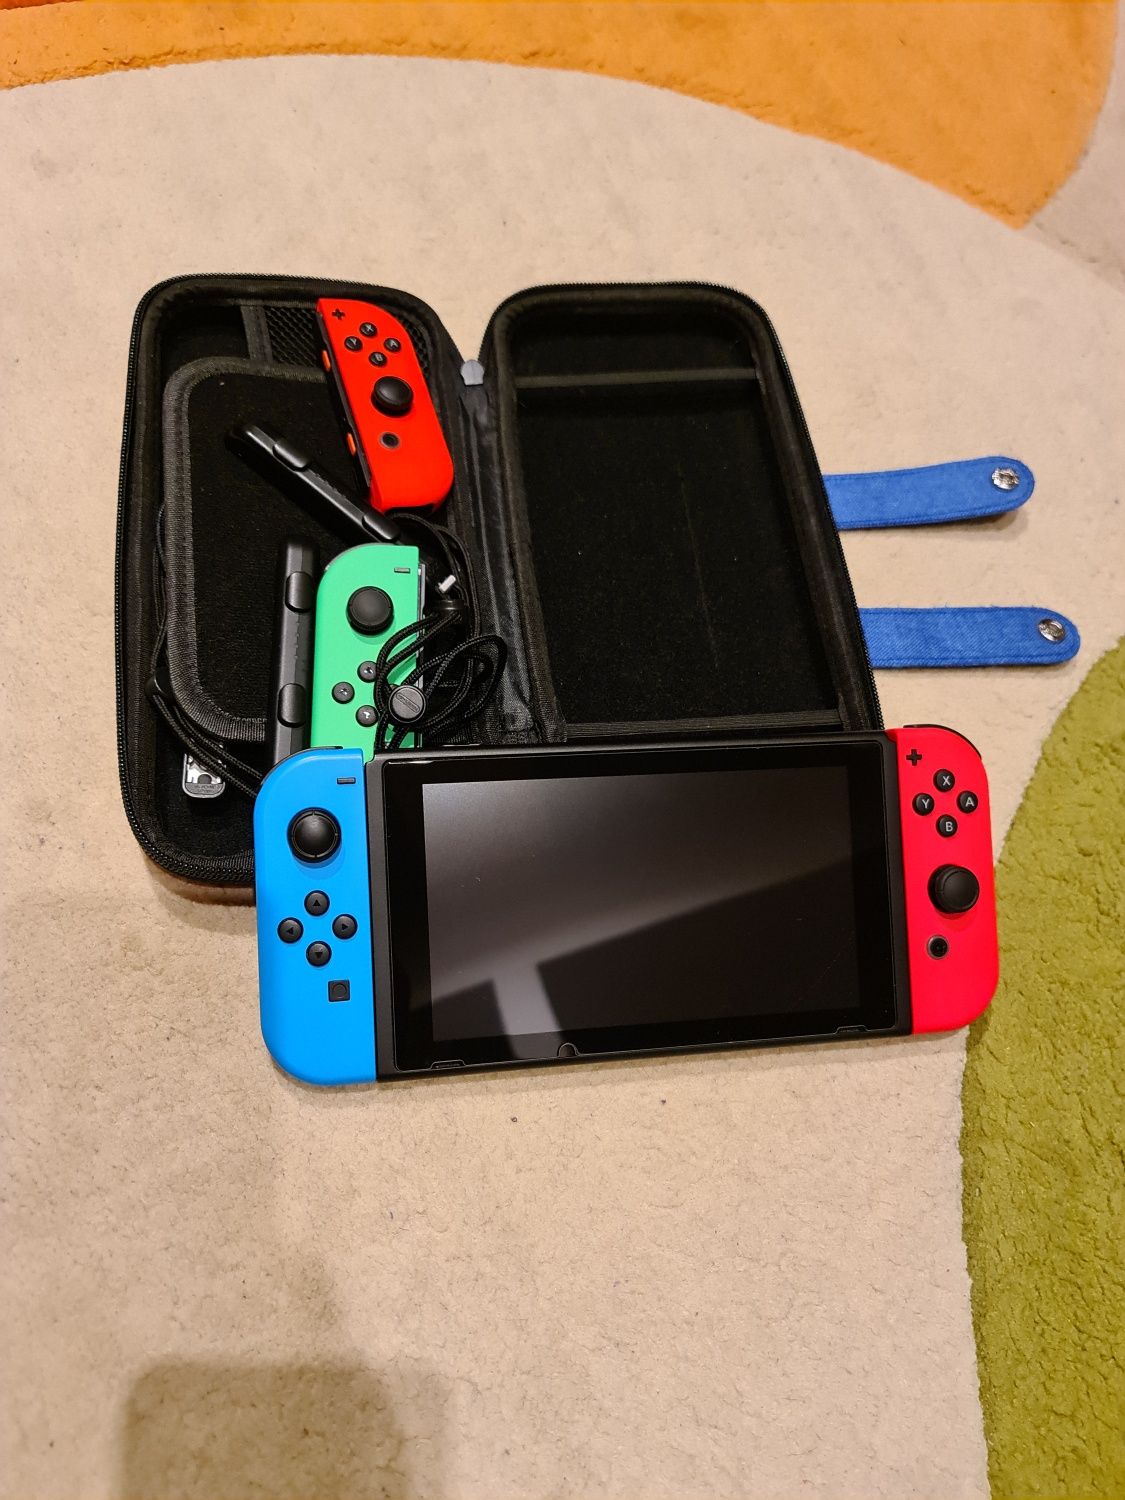 Nintendo switch red/blue